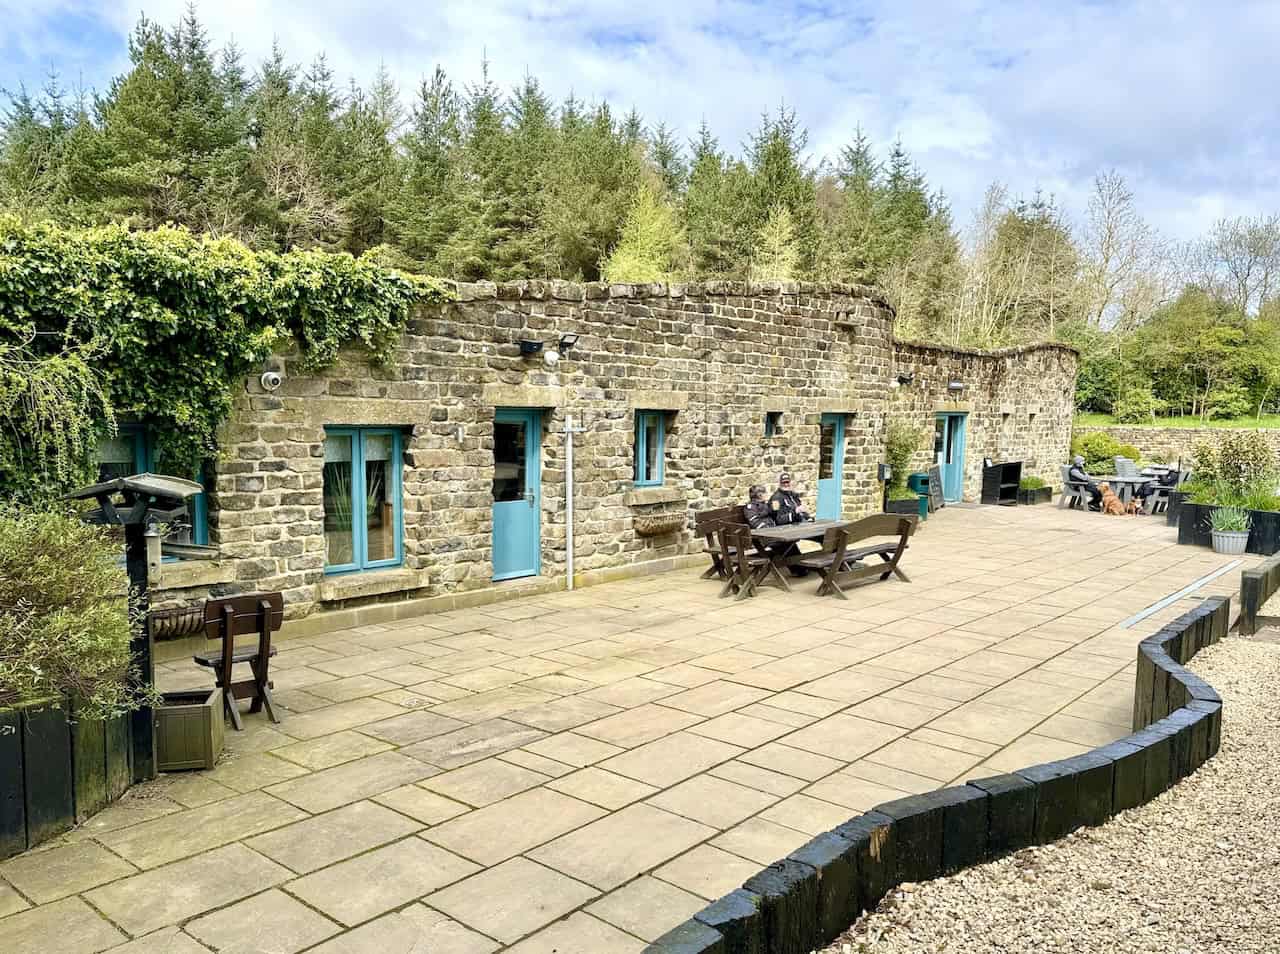 We reach Lordstones, a café, bar and grill, farm shop, and a spot for glamping and camping. It’s a pleasant place for coffee, snacks, and a break, attracting visitors from afar. On one occasion, a group flew in by helicopter from Leeds to enjoy lunch here.